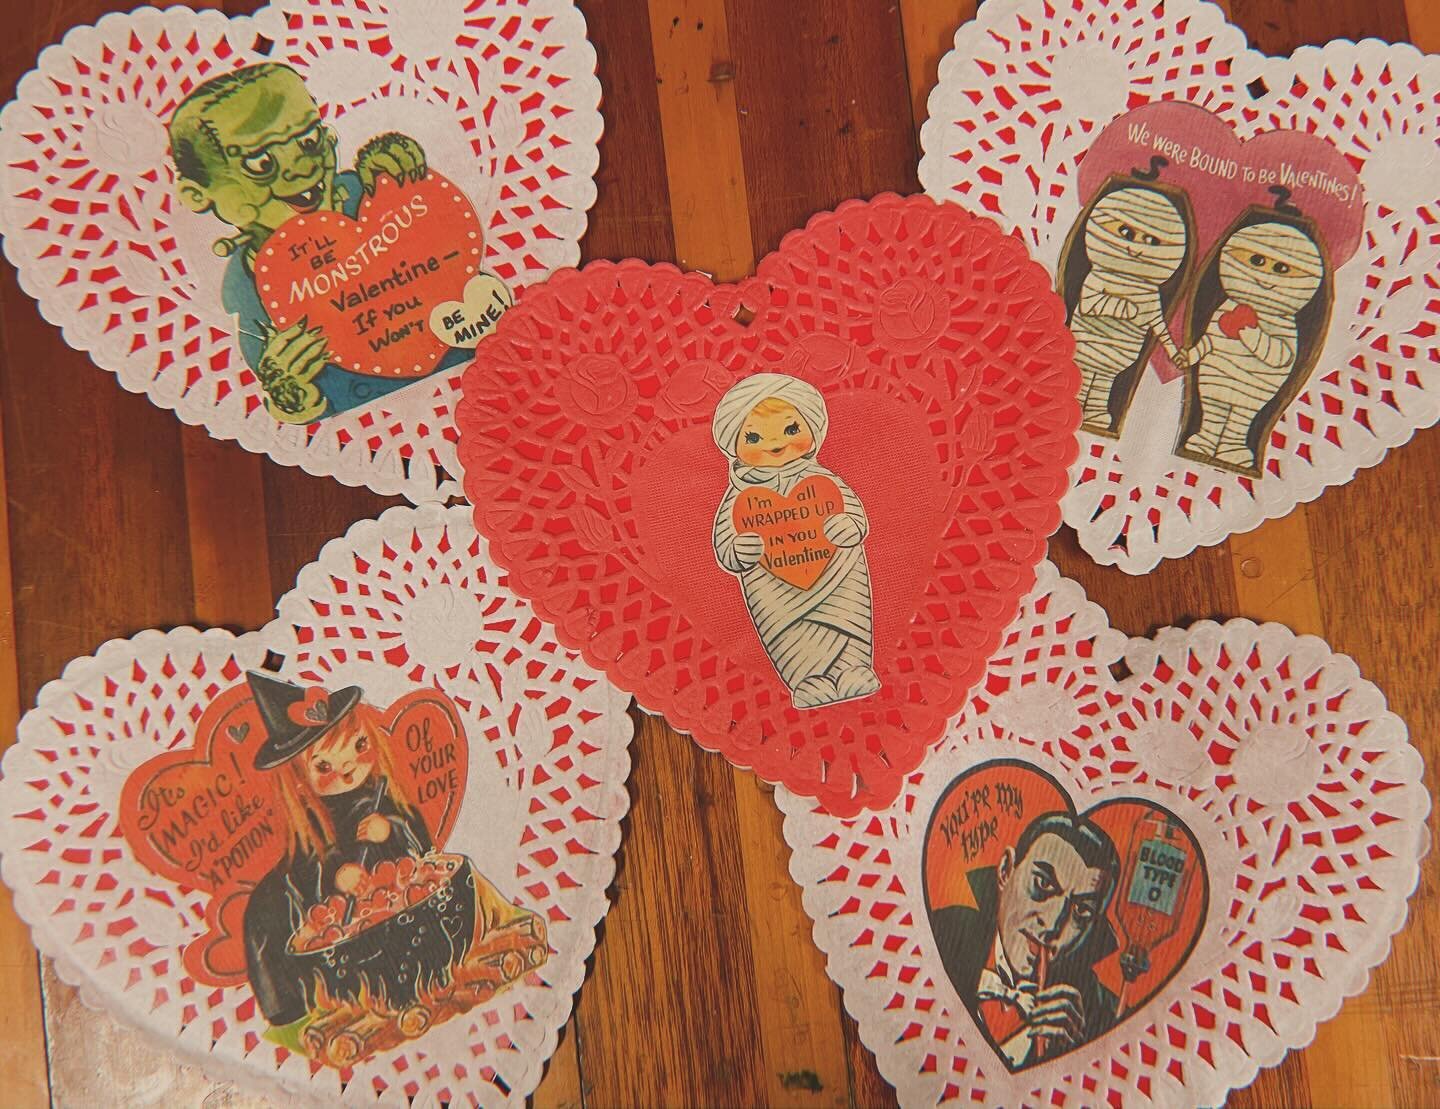 Locals! I made some cute vintage spooky valentines last minute. I&rsquo;ll be at @satellitebarandlounge tomorrow from 12-4 for the monthly market, come snag one! Also finishing up some anti-valentines tonight 💔 AND any vintage clothing on the rack t